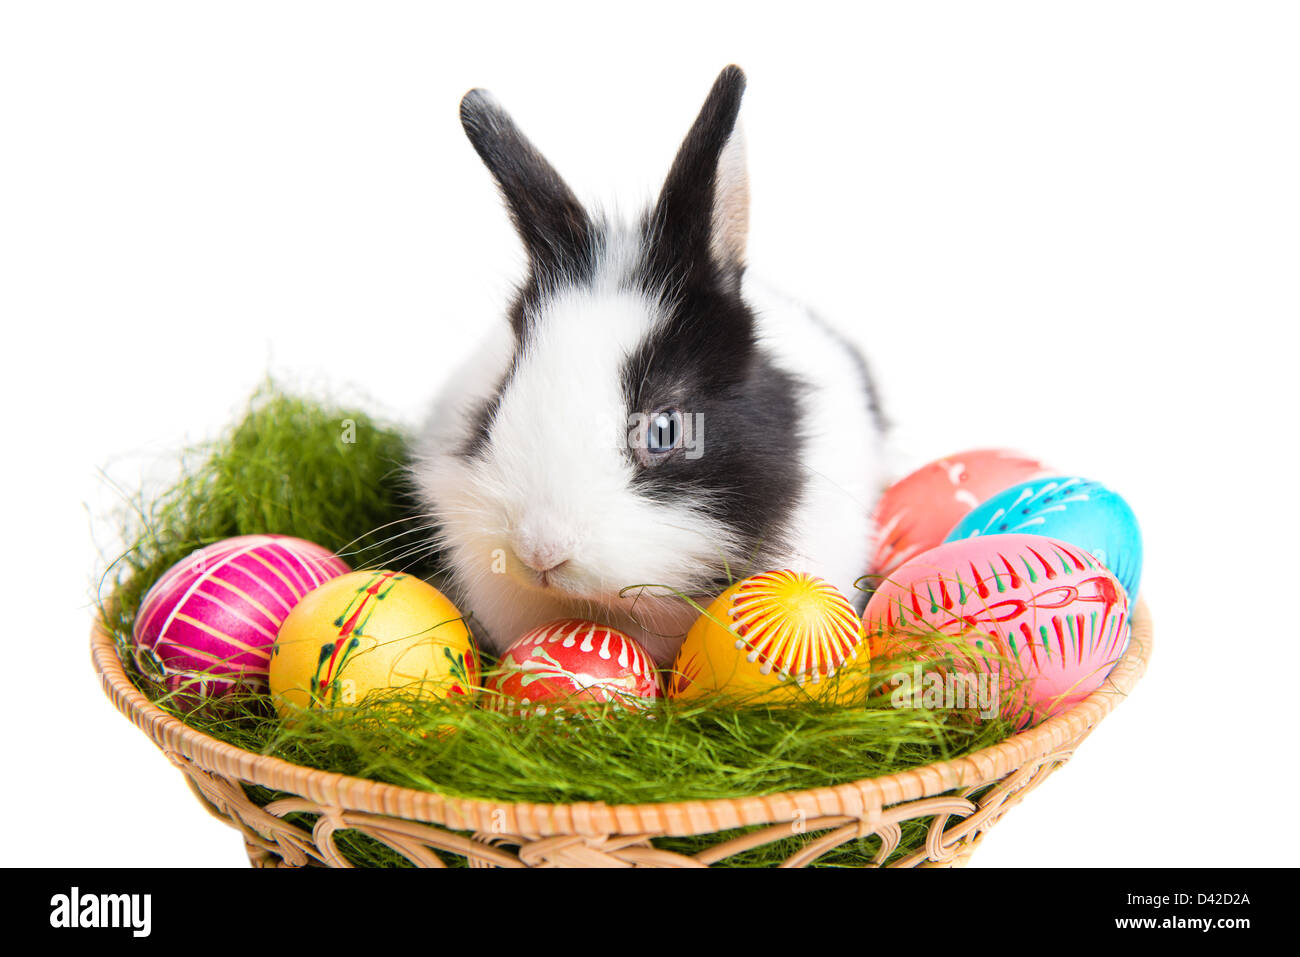 Easter greeting card - Eeaster bunny, grass and eggs in nest, isolated on white background Stock Photo